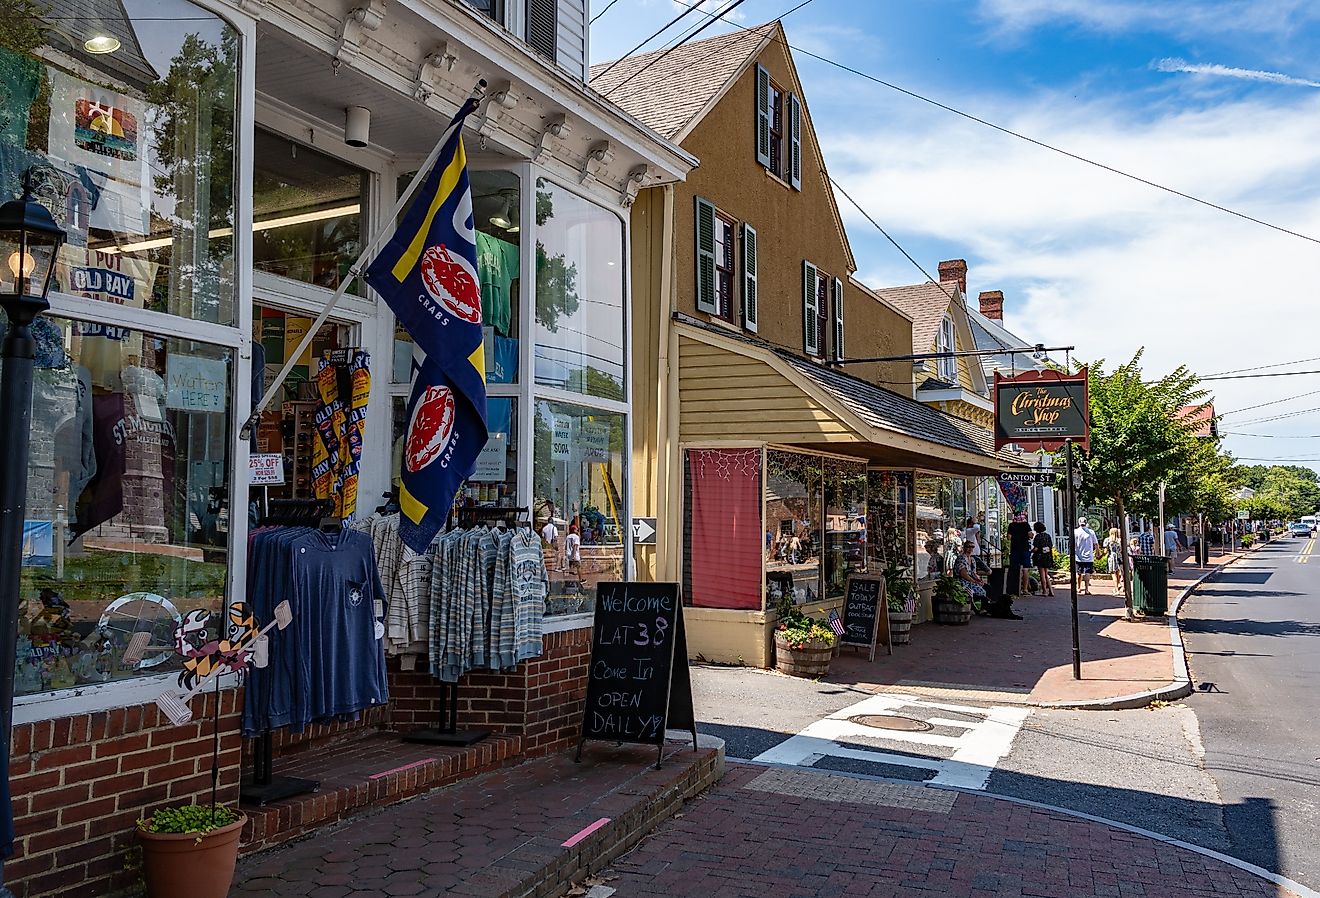 Downtown street in St. Michaels, Maryland in the summer. Image credit Chris Ferrara via Shutterstock